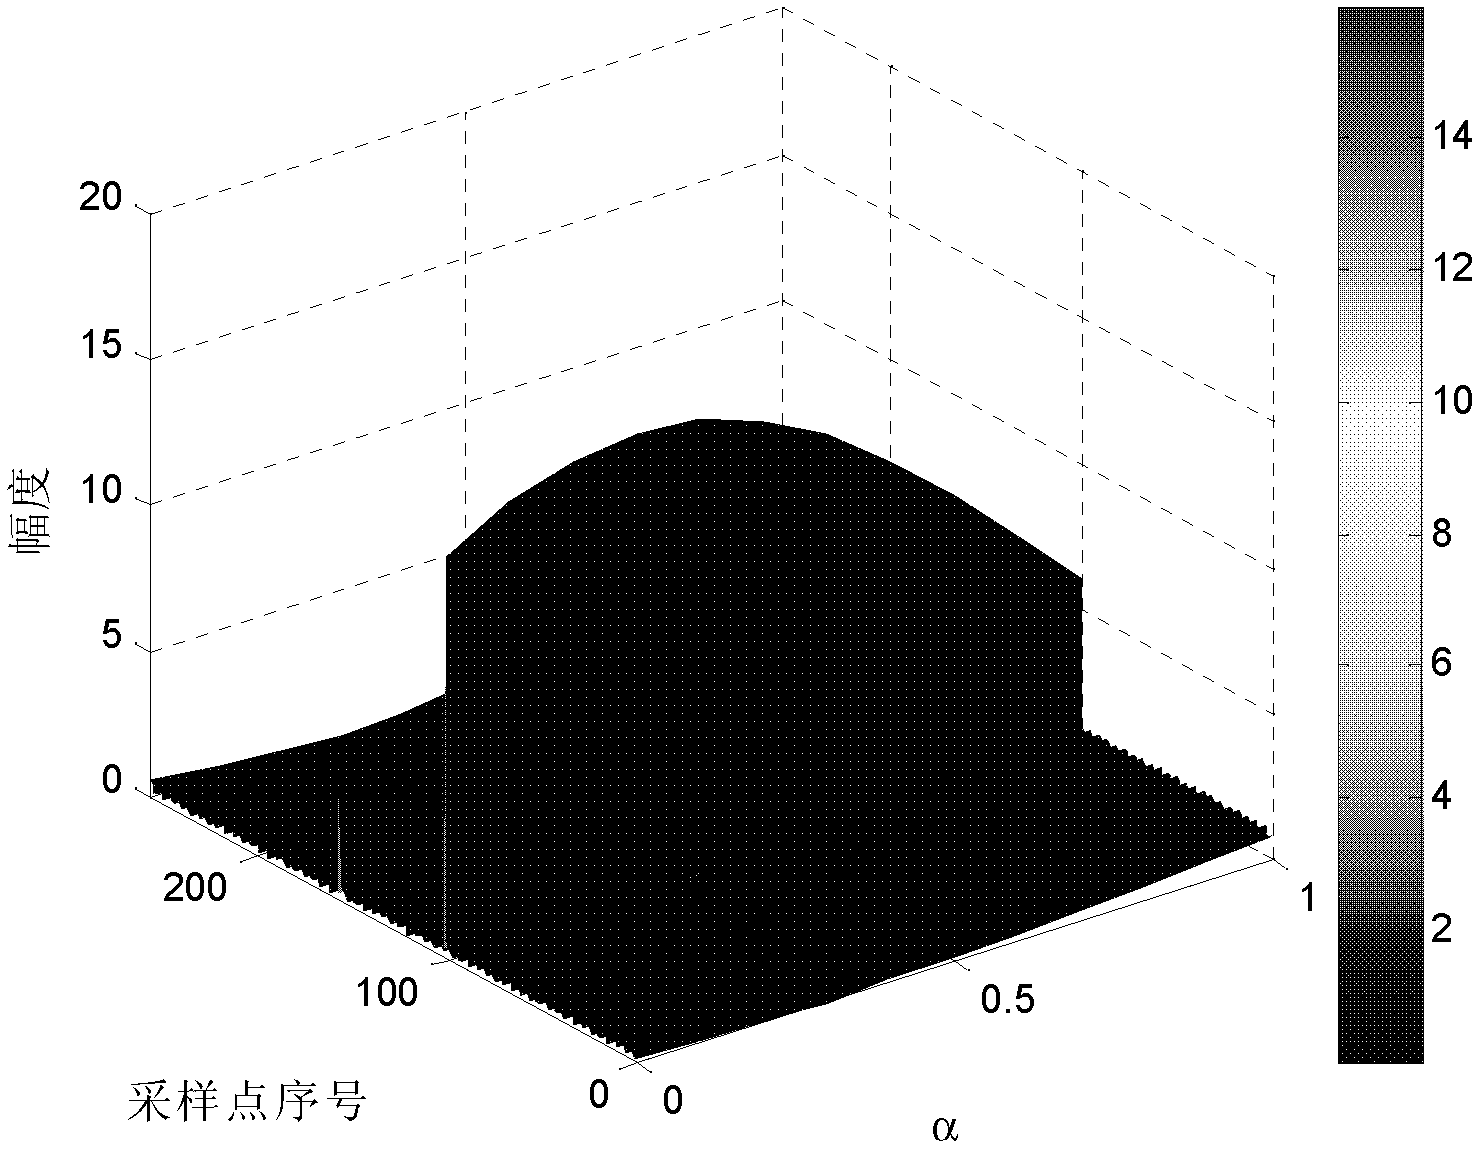 Narrowband interference suppression method based on weighted score Fourier transform domain